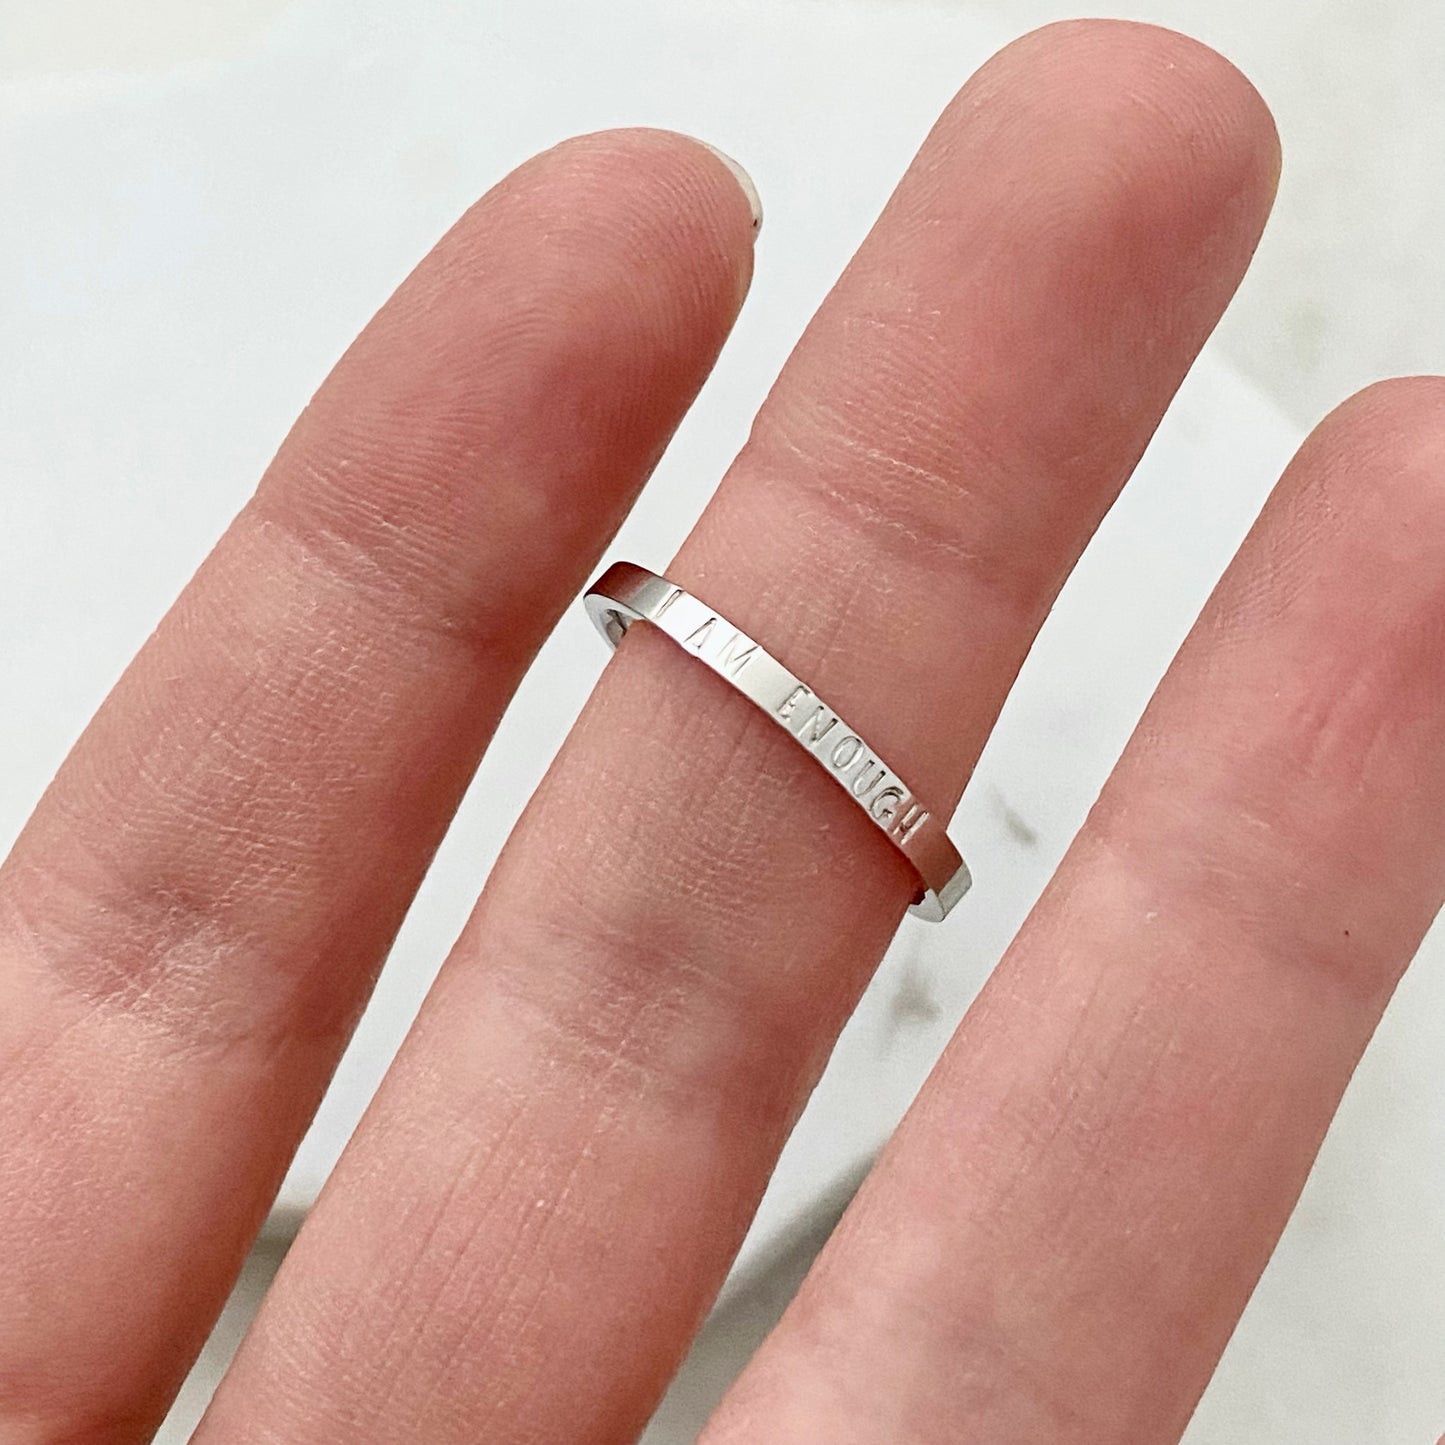 I am Enough, Size 8, Silver Mini Stacking Ring, Stainless Steel Jewelry, Minimalist Rings, Waterproof Jewelry, Dainty Ring, Stacking Ring Set Rings callistafaye   